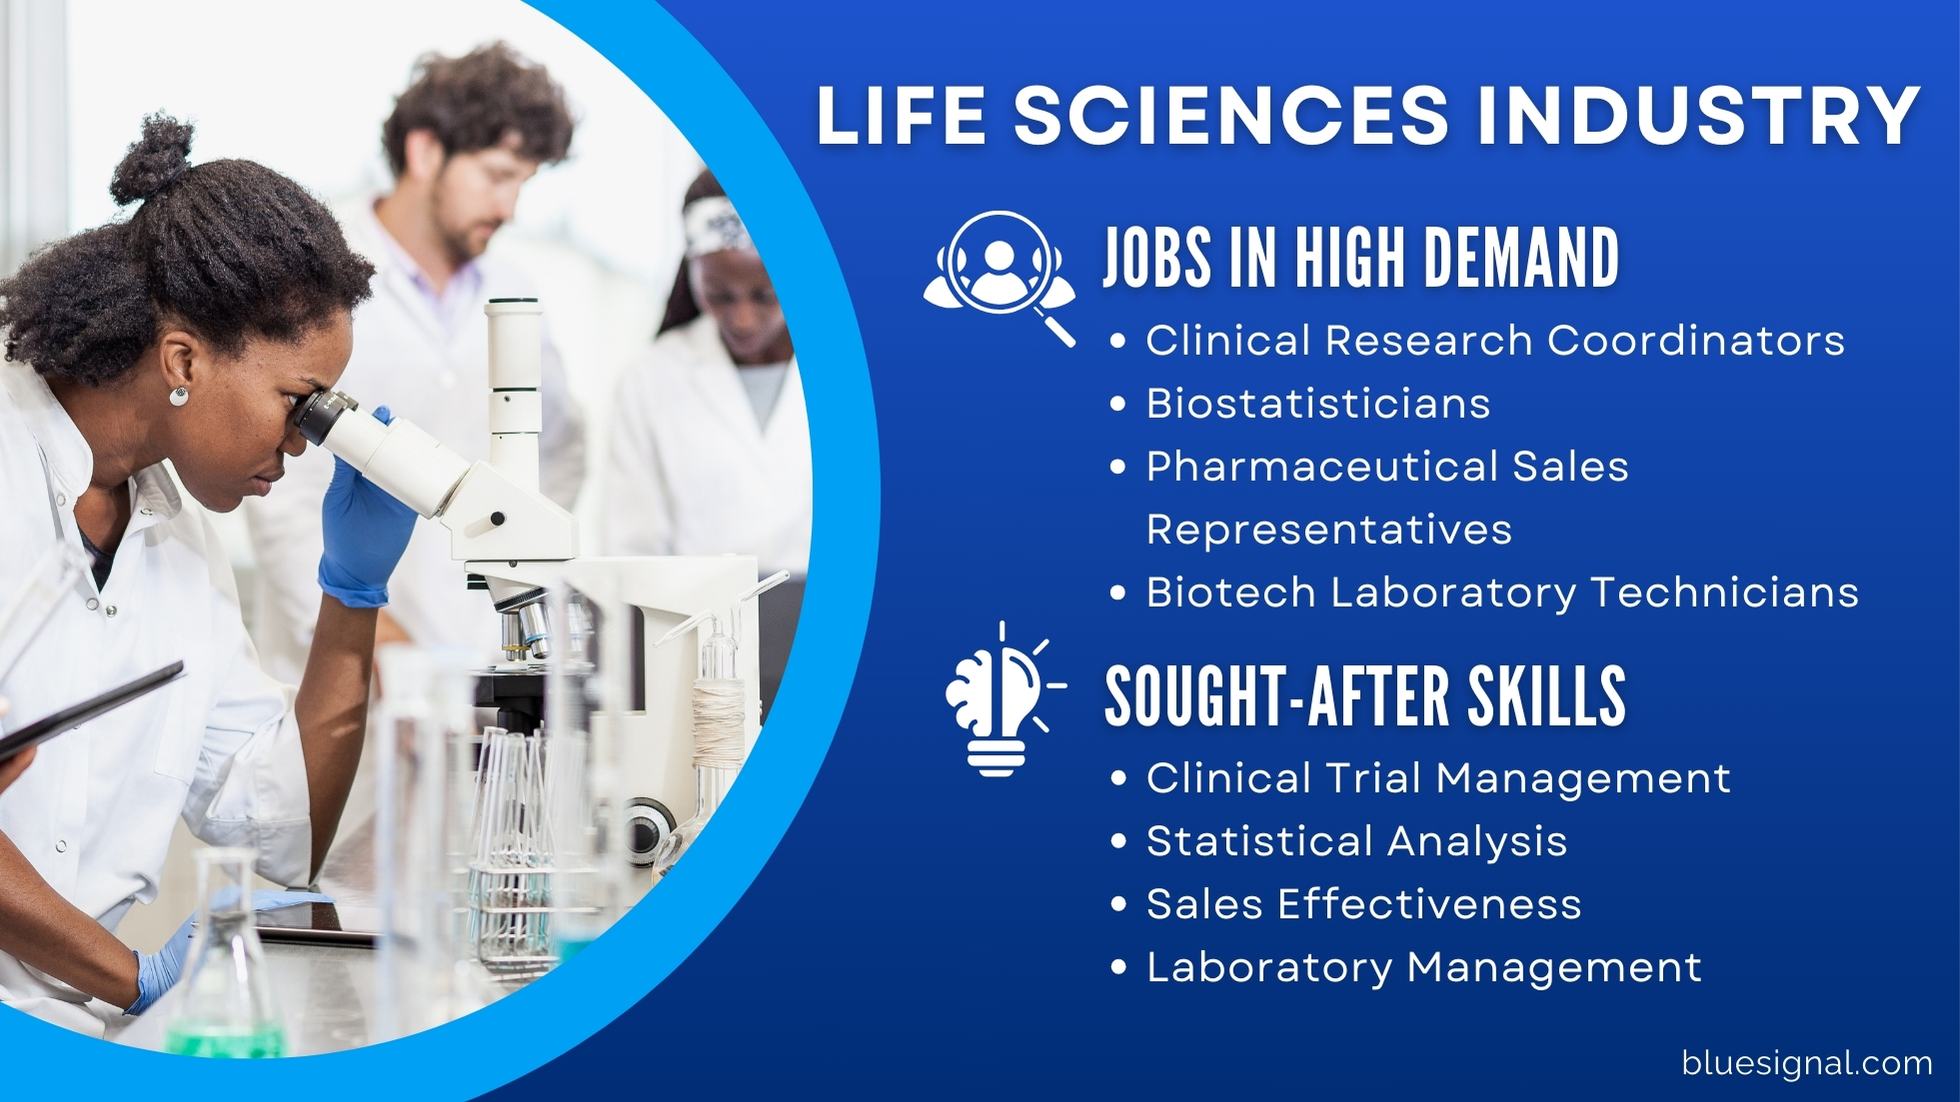 Life sciences professionals engaged in laboratory research, representing sought-after jobs and skills in the industry.